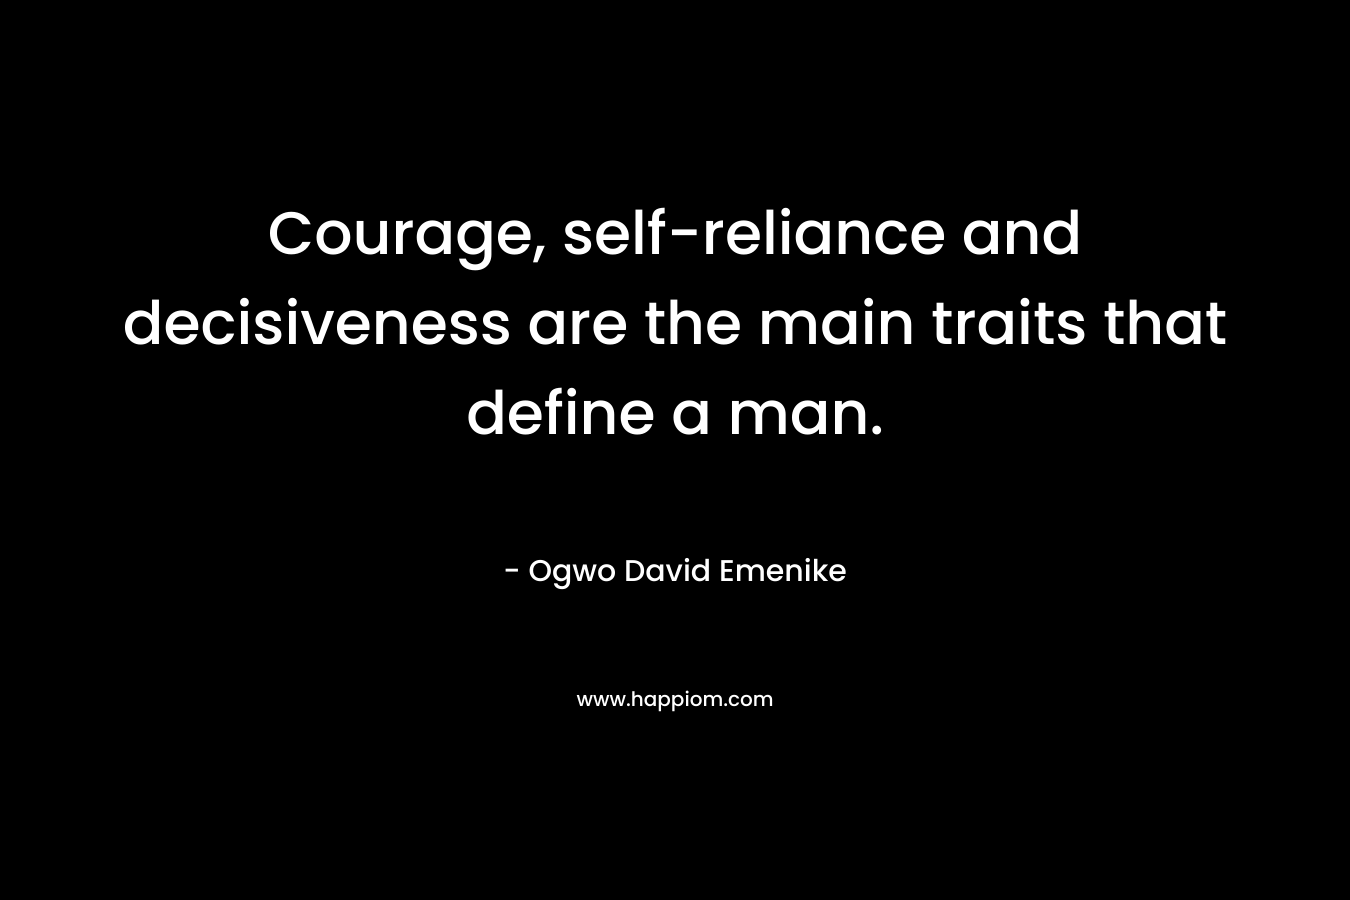 Courage, self-reliance and decisiveness are the main traits that define a man.